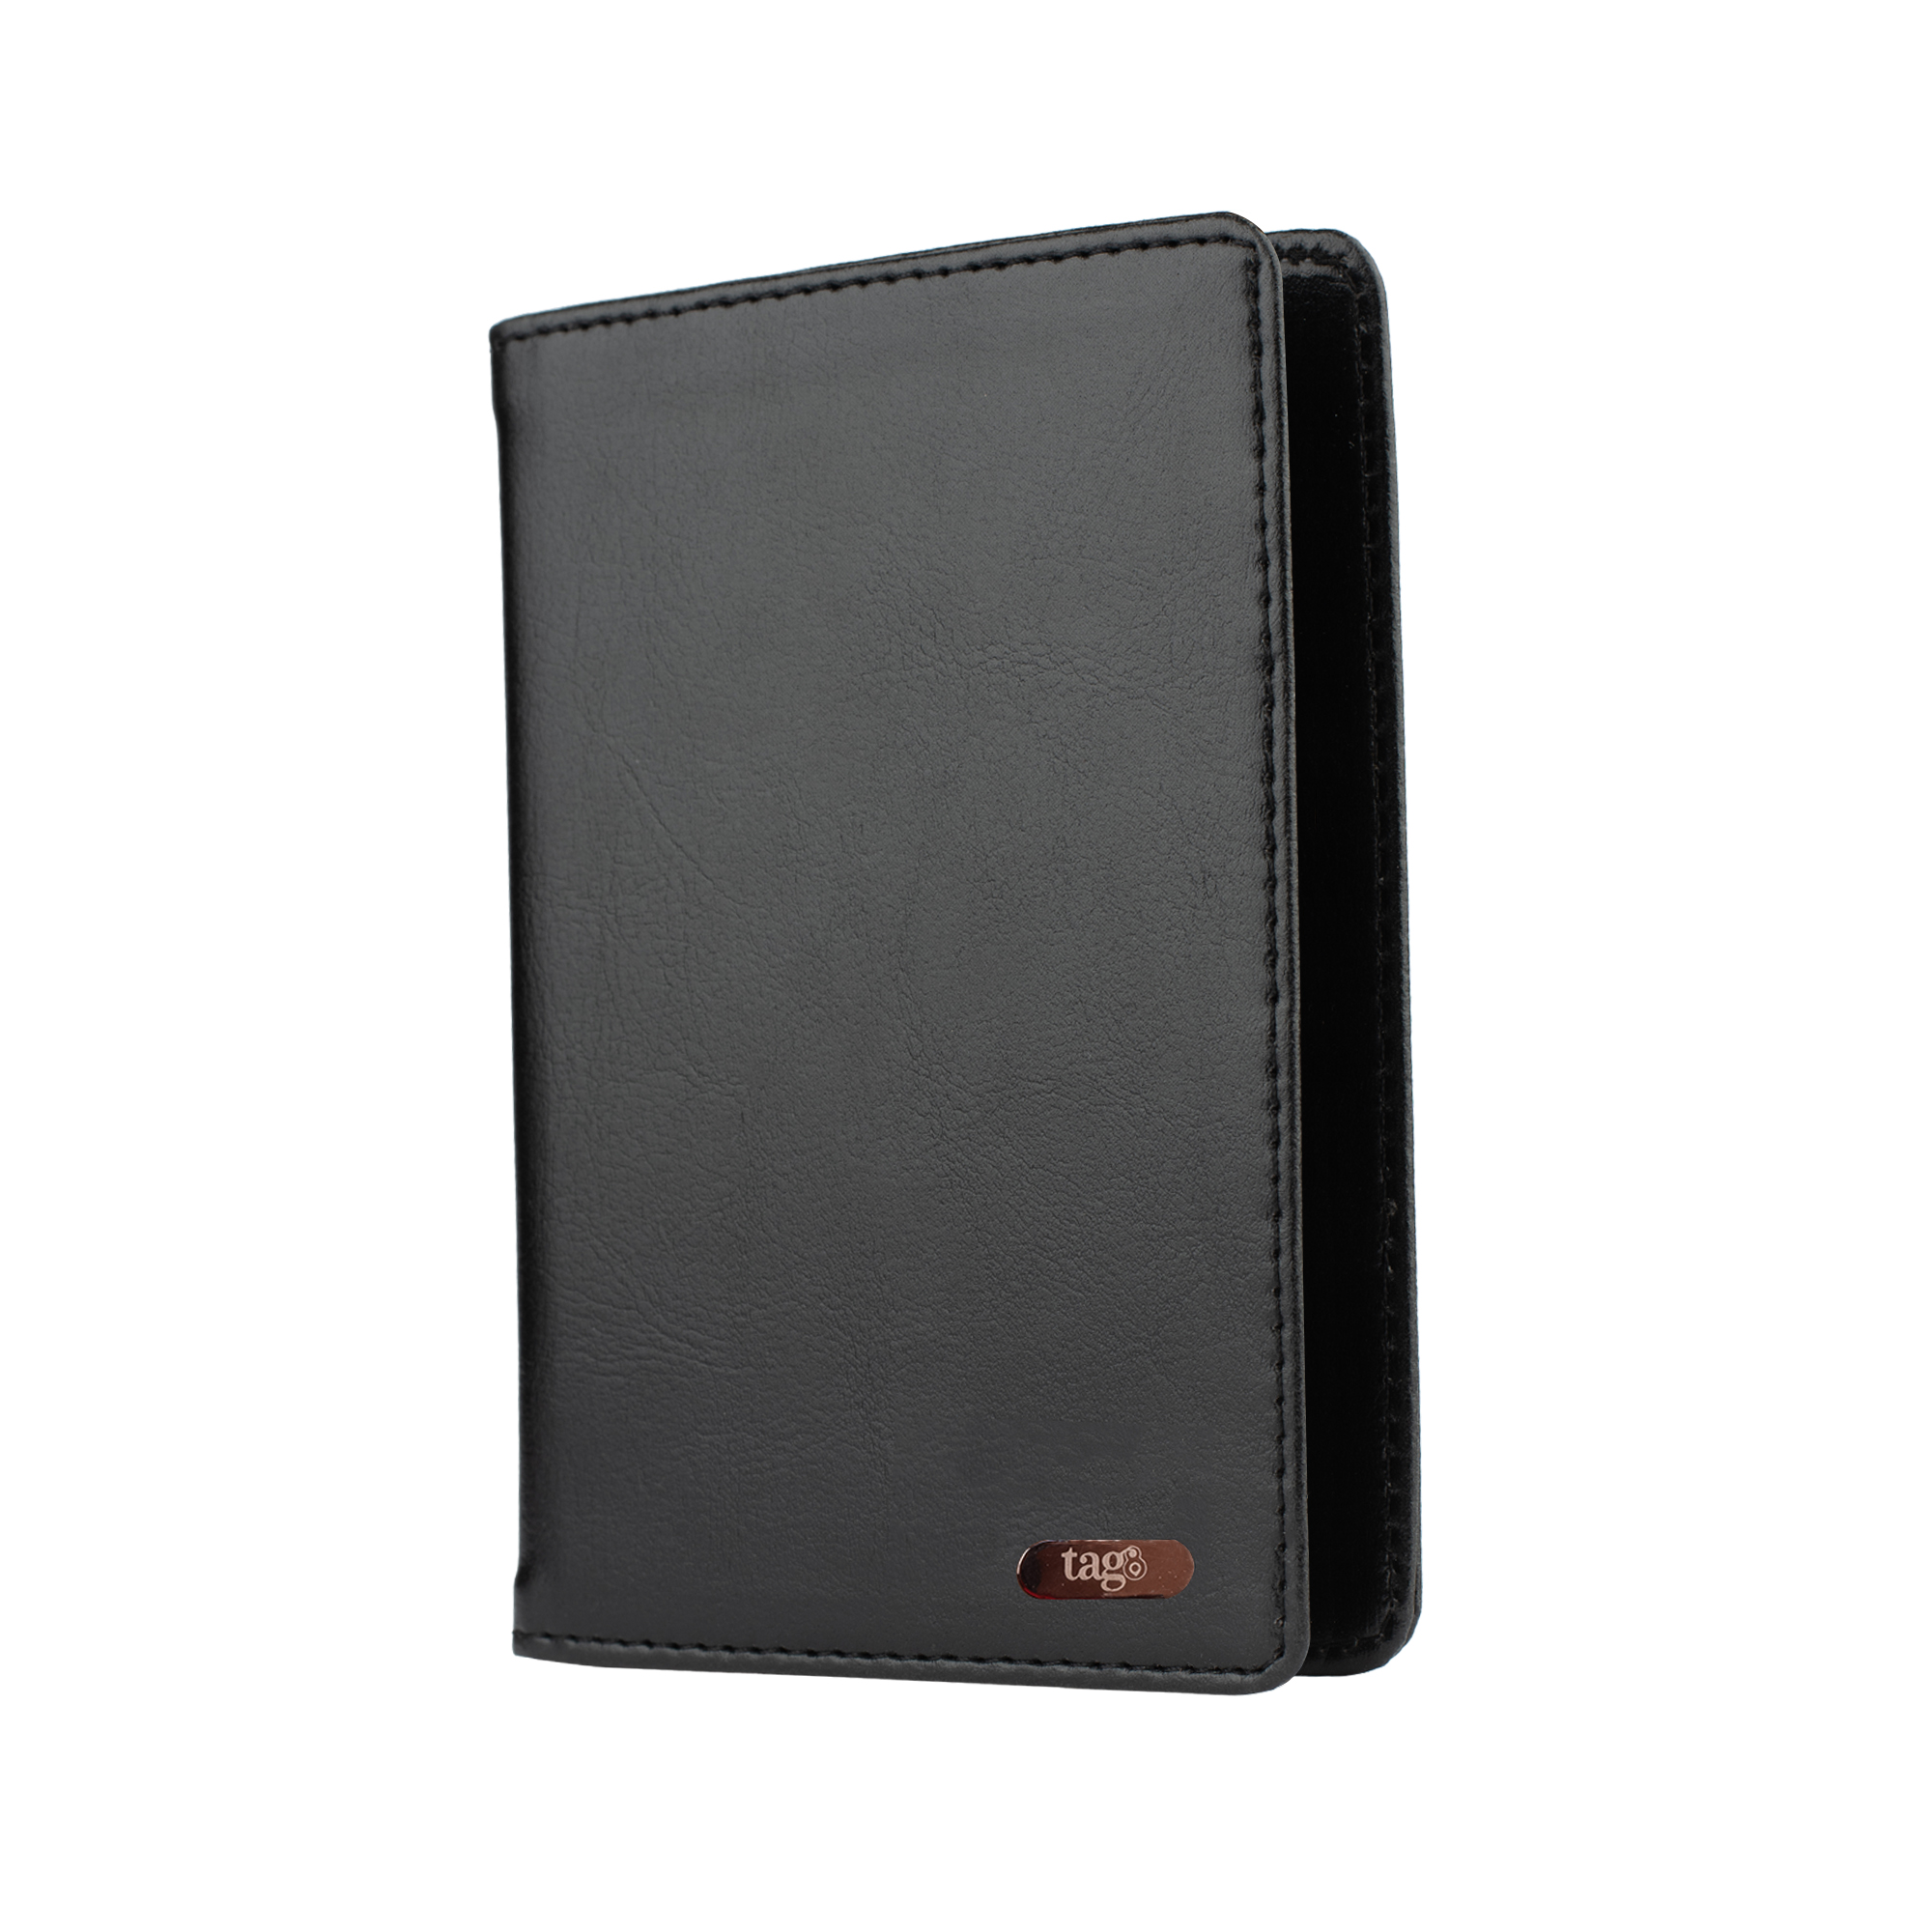 tag8 Dolphin Smart Leather RFID Passport Case - Tan